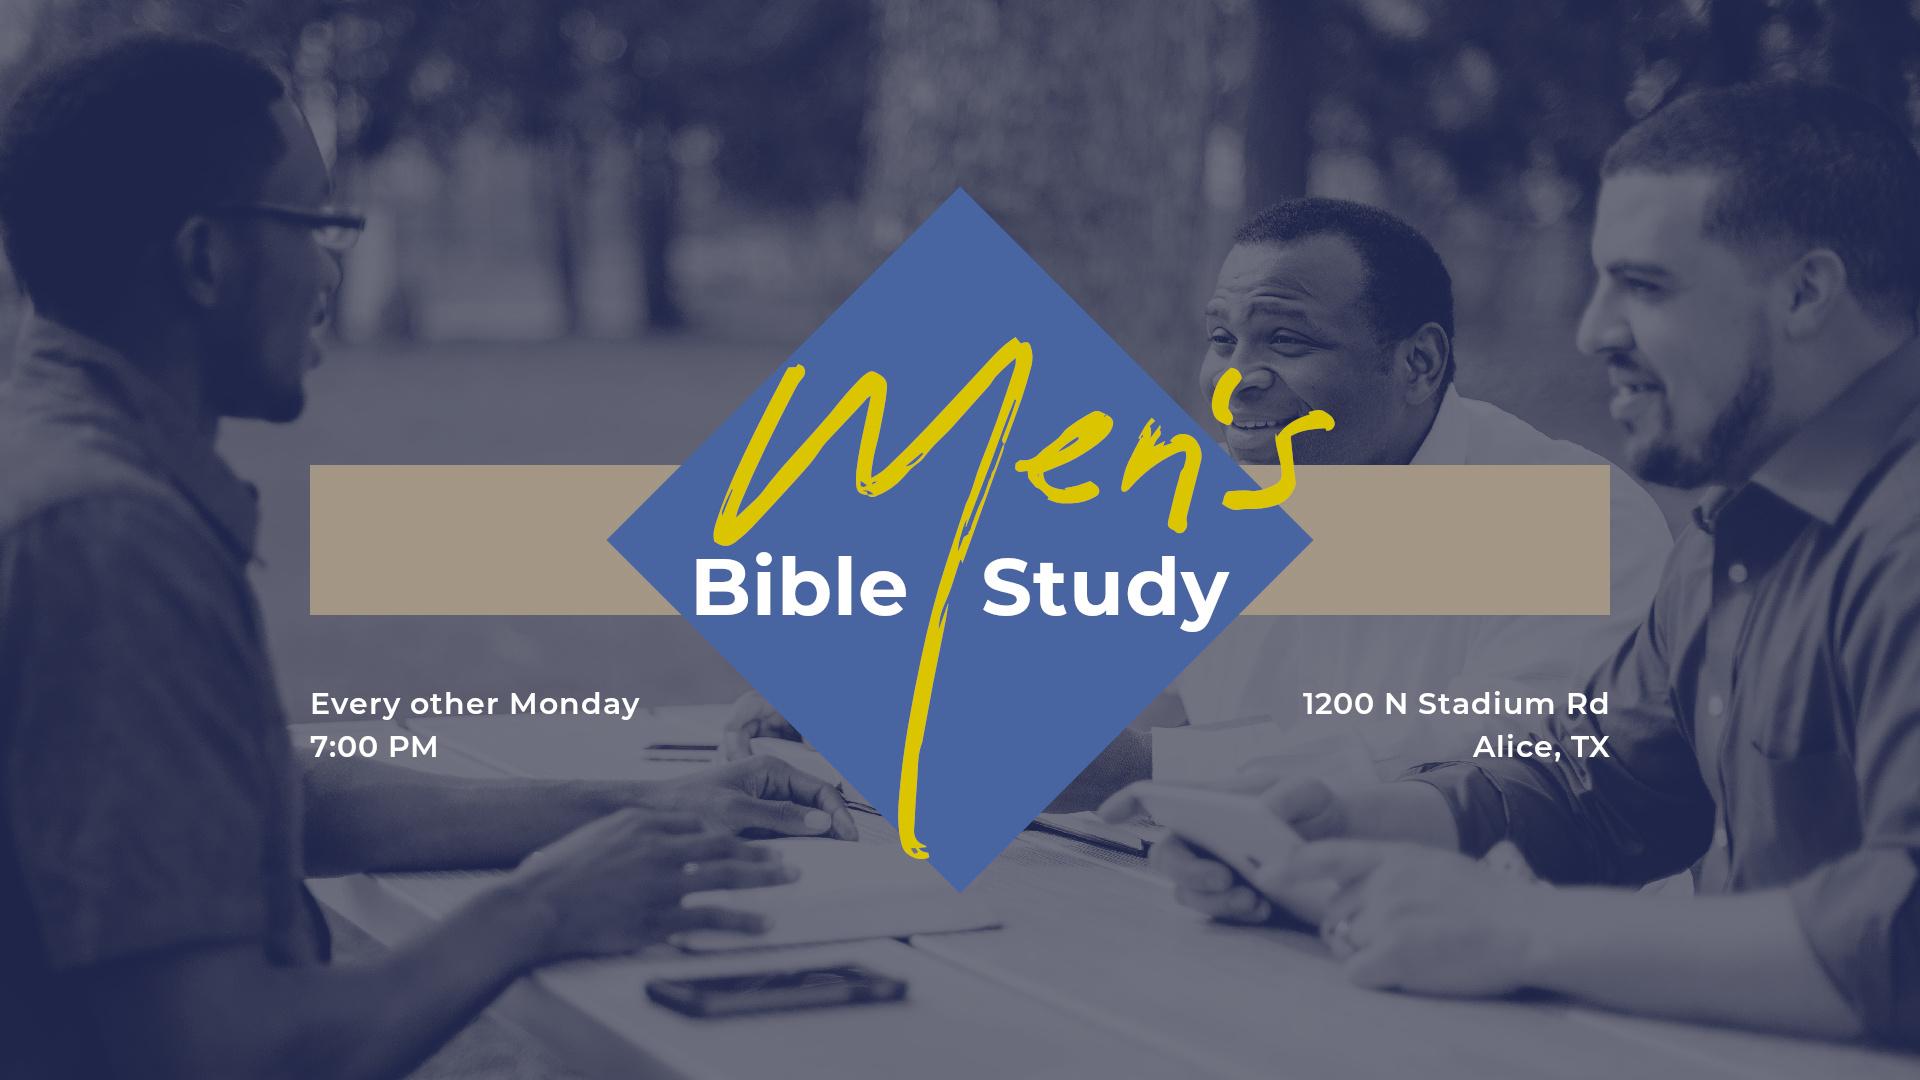 Men's Bible study every other Monday at Cornerstone Baptist Church